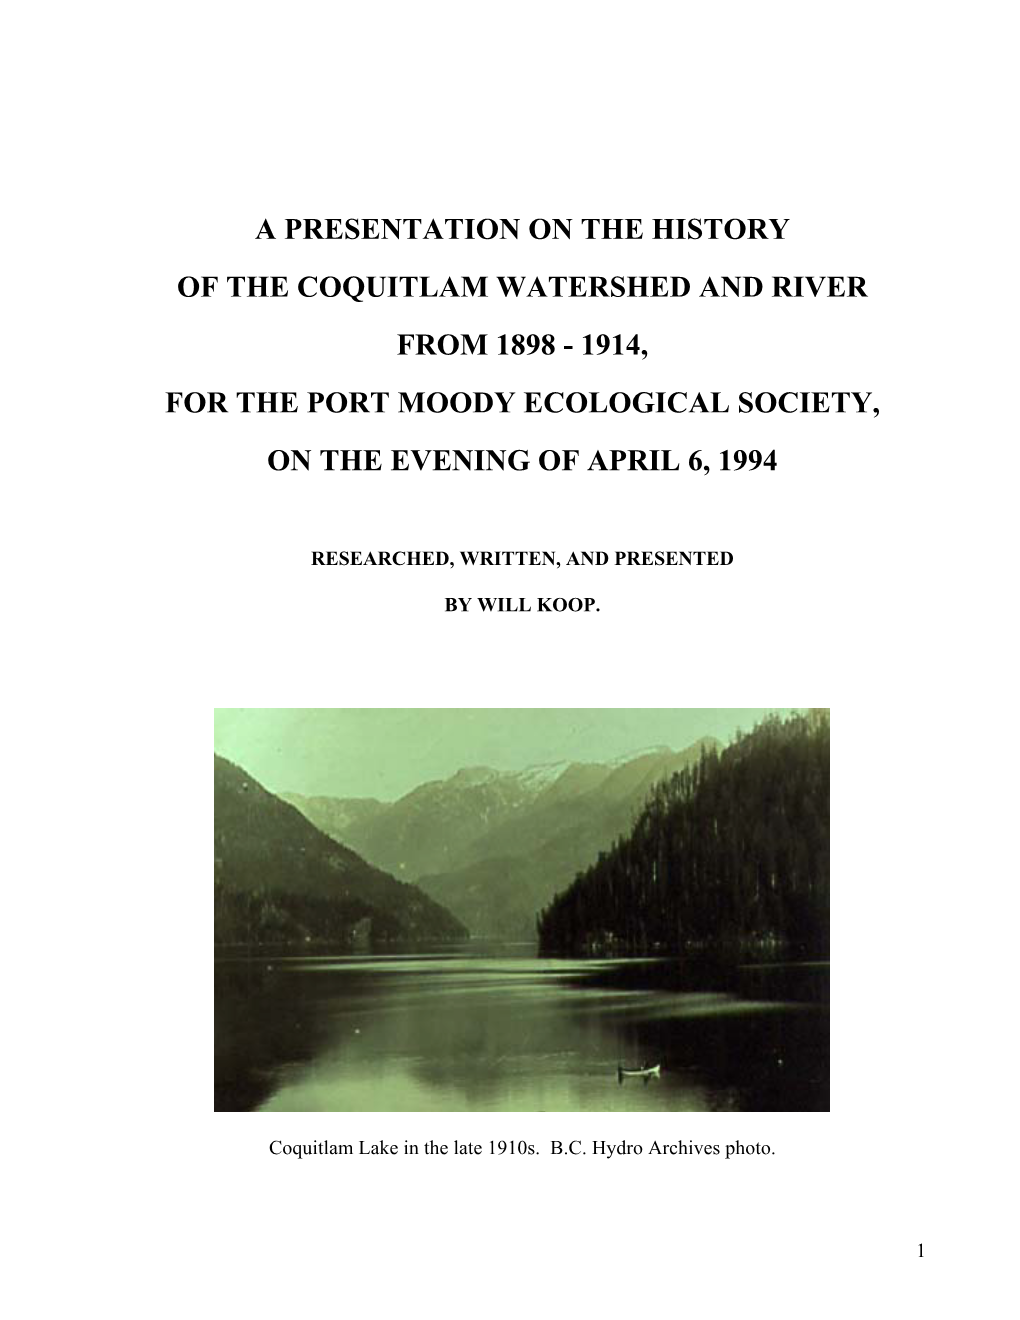 Coquitlam Watershed History